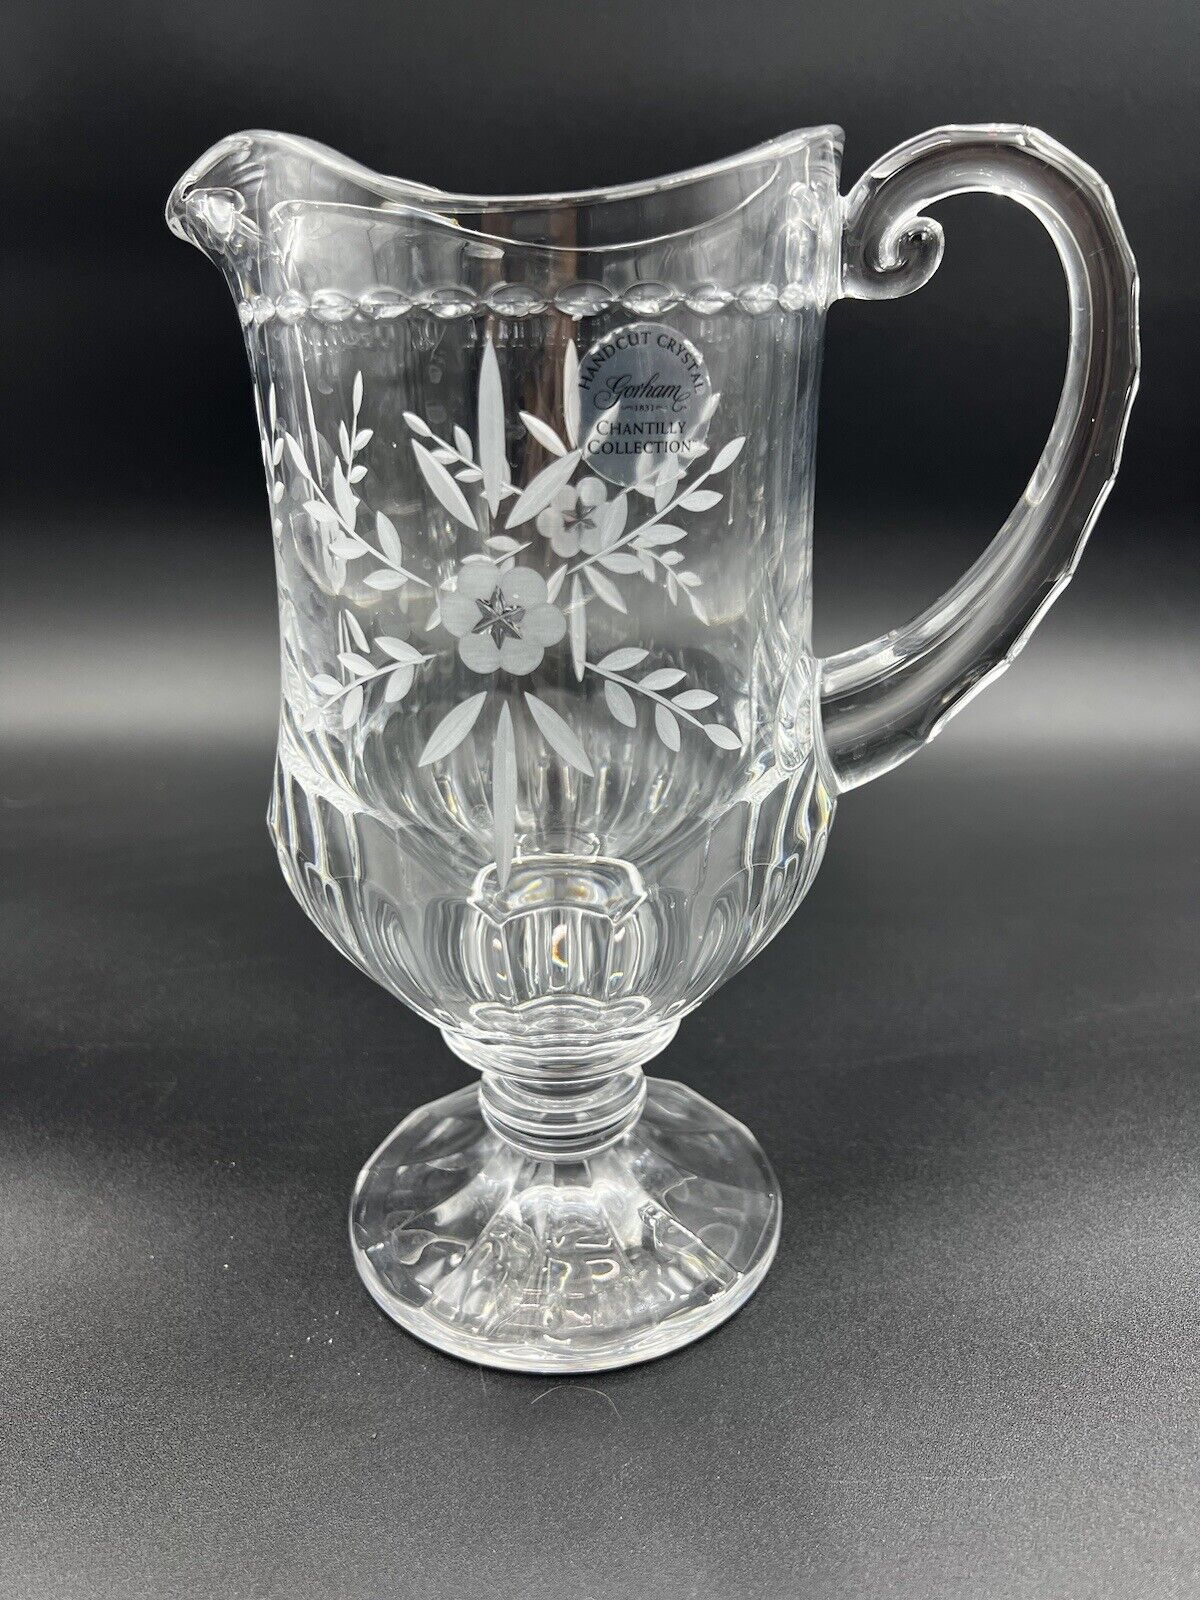 Gorham Crystal Chantilly Collection Pitcher with Etched Floral Design